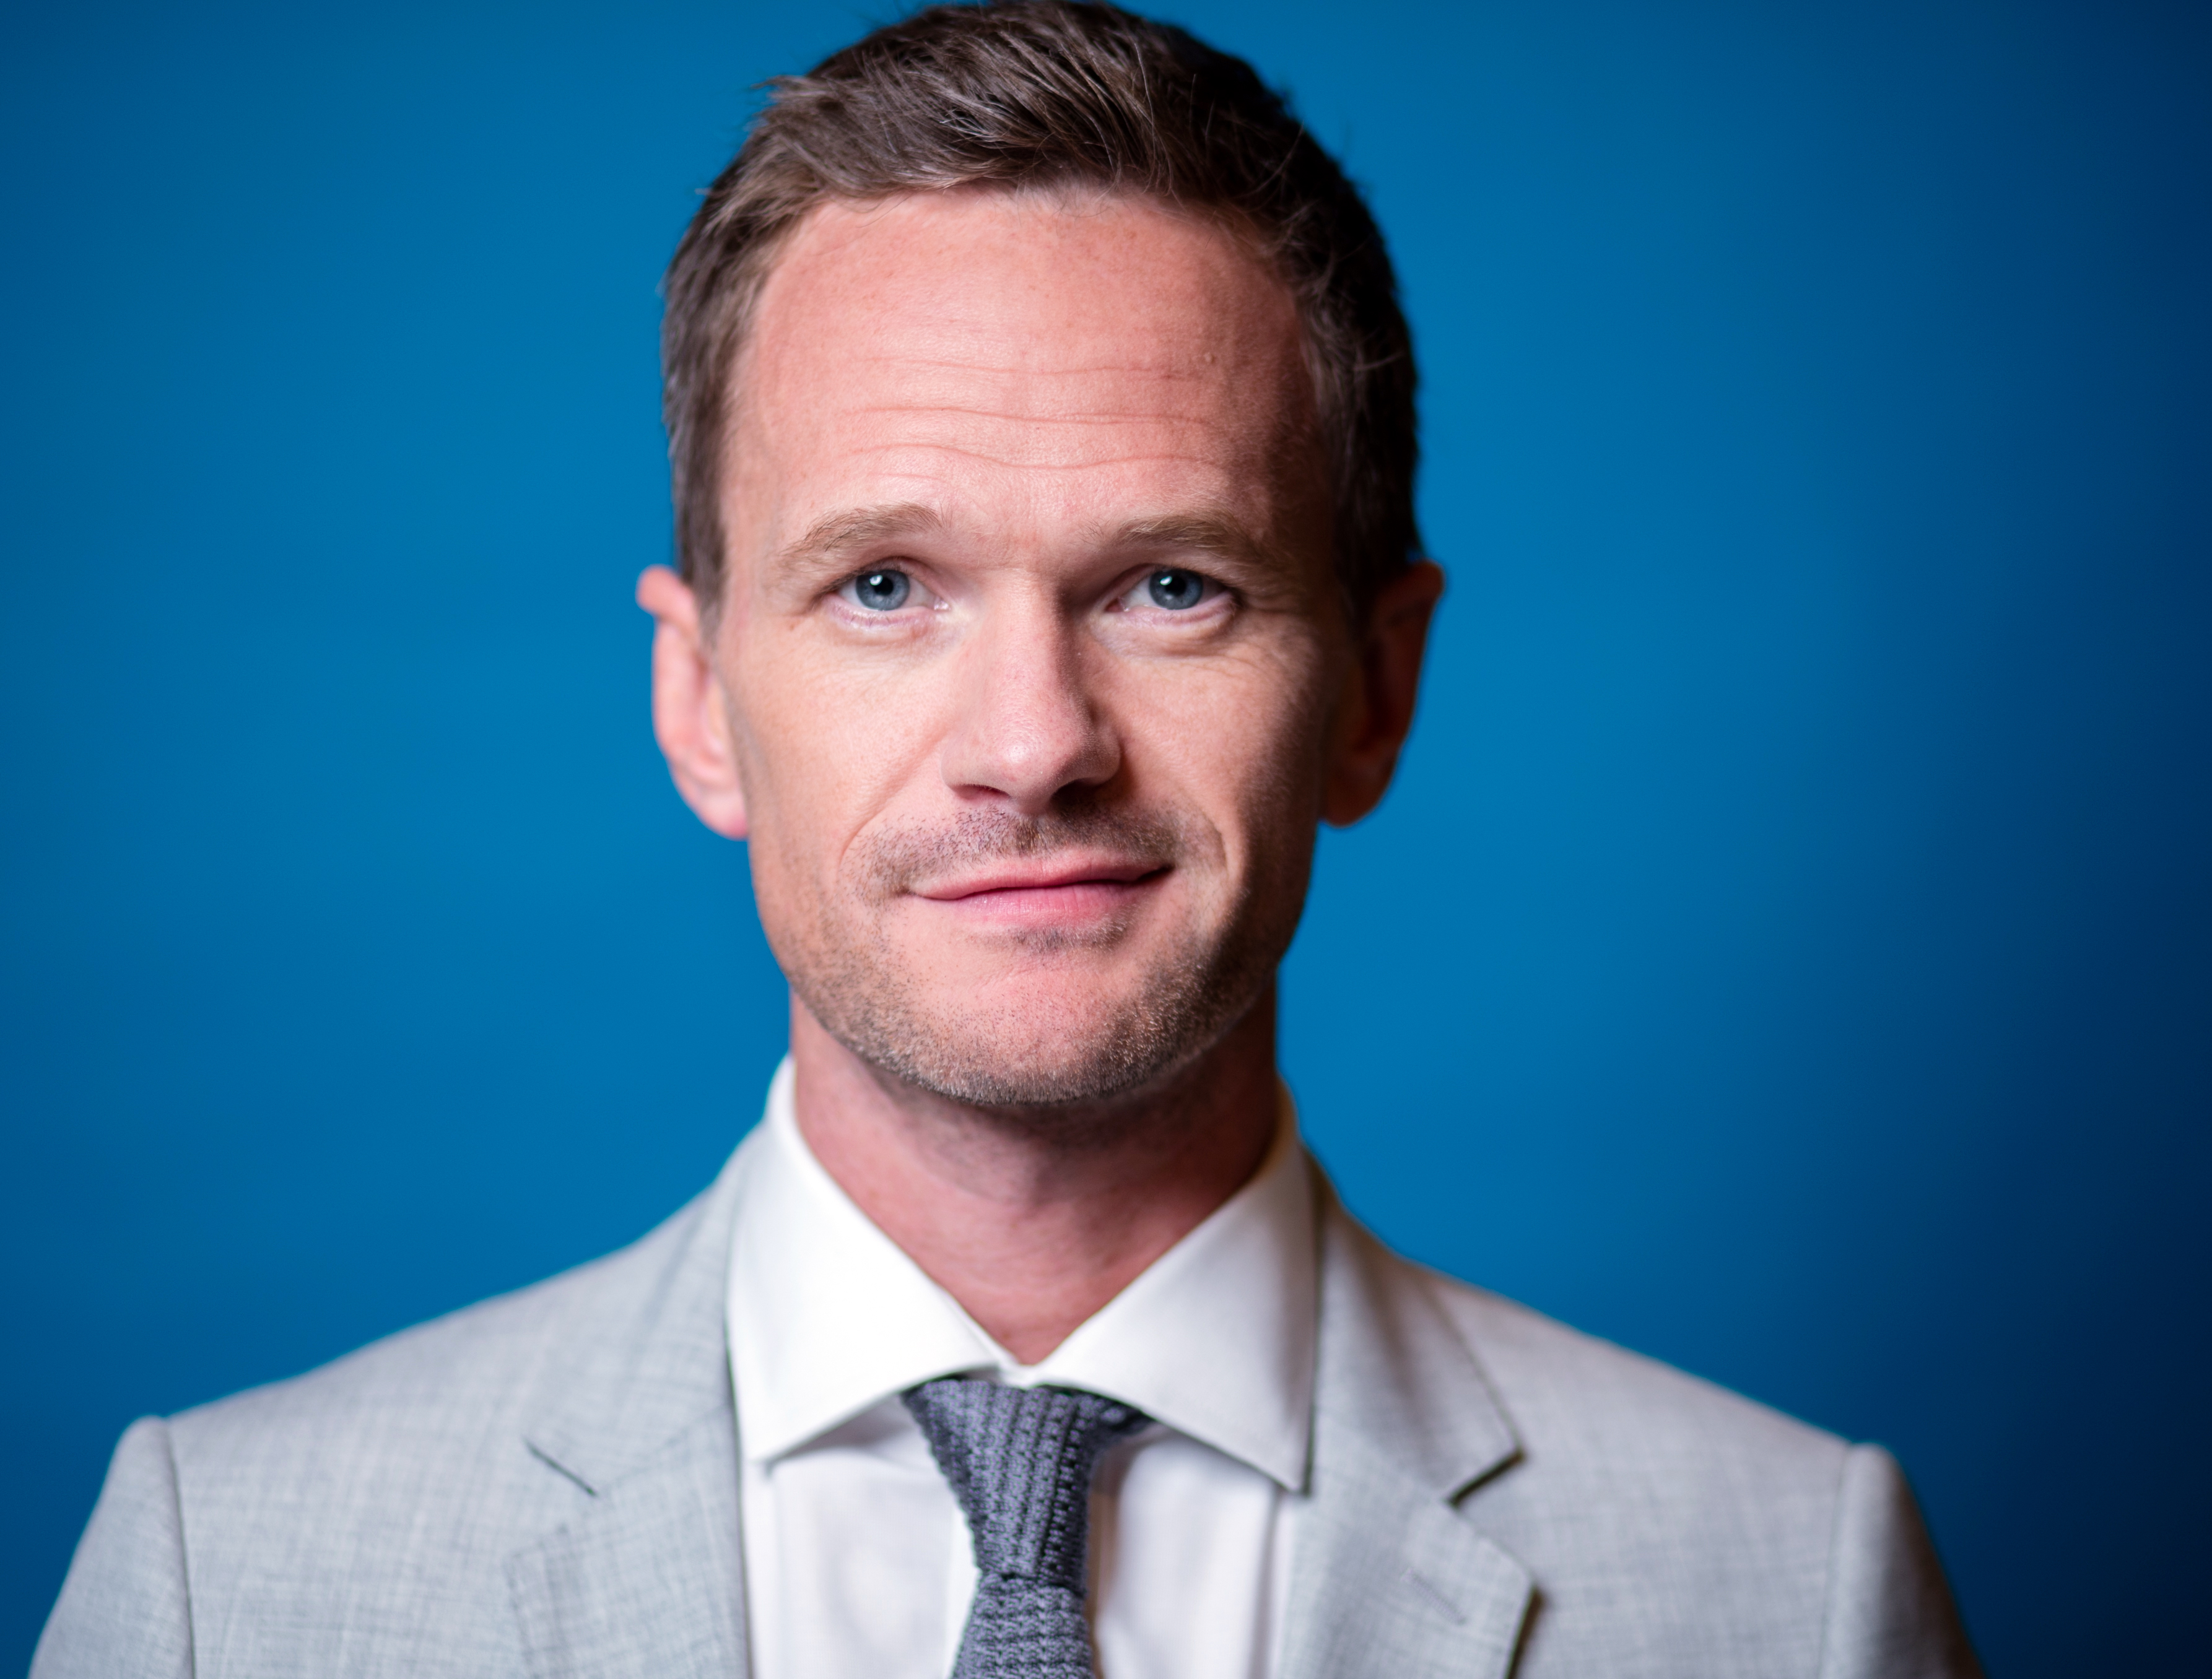 Neil Patrick Harris at the 2015 Summer TCA Tour in Beverly Hills, Calif. on Aug. 13, 2015. (Christopher Polk—NBC/NBCU Photo Bank via Getty Images)